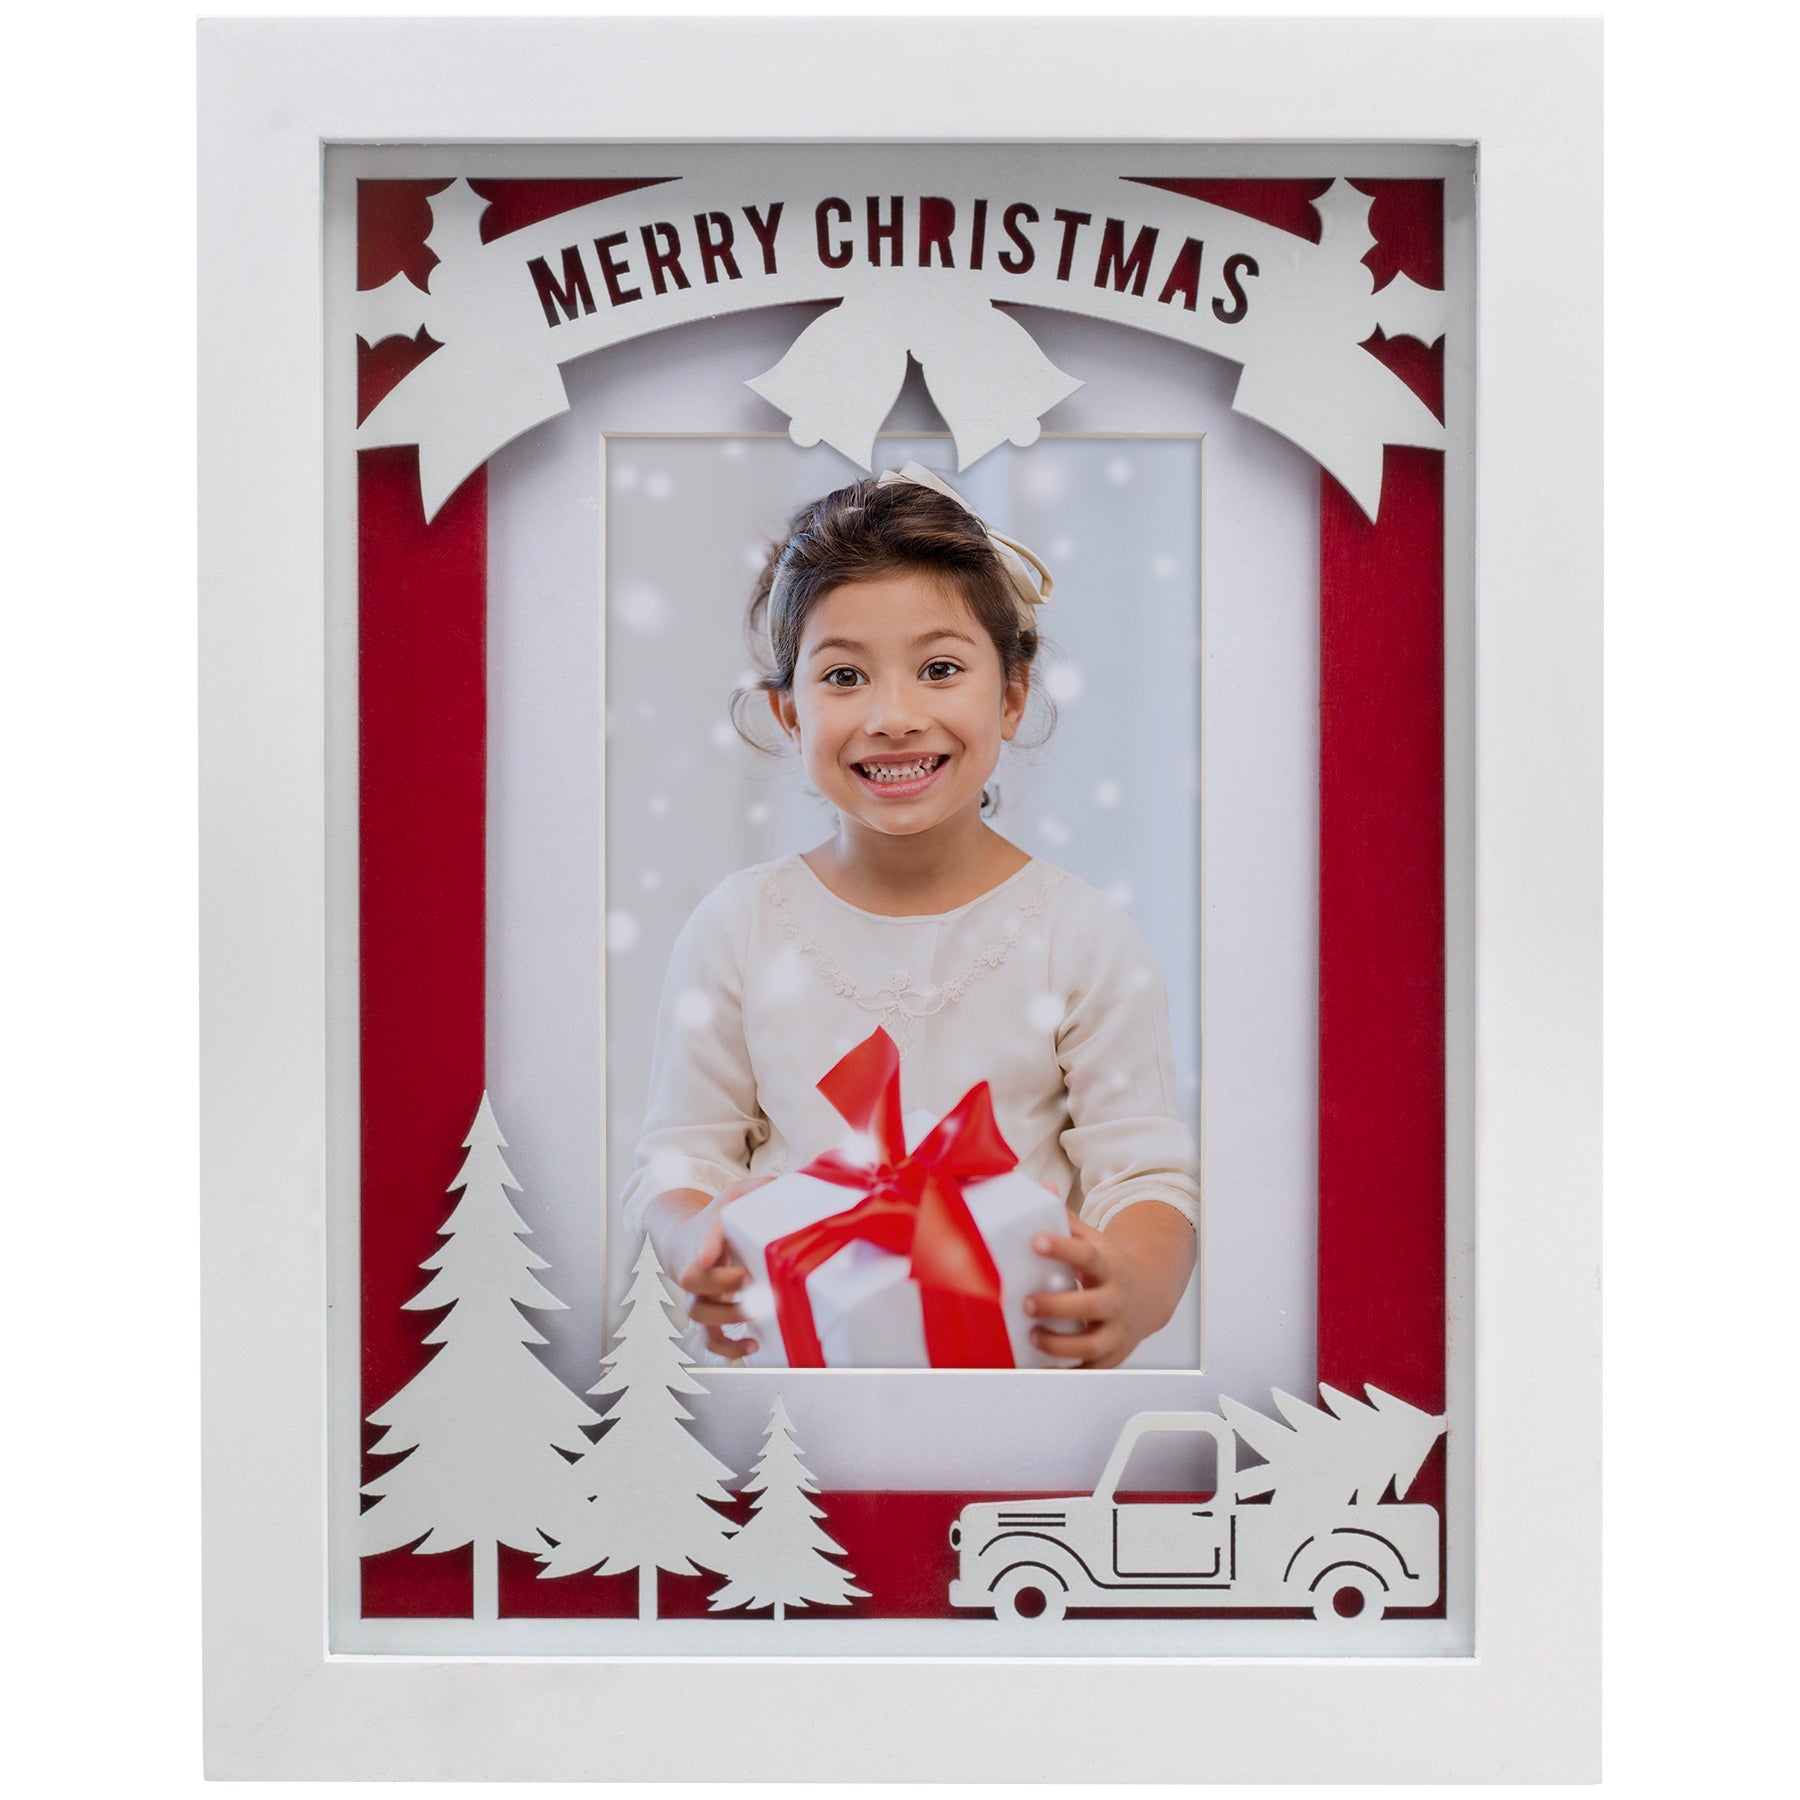 Merry Christmas Laser Cut 5" x 7" Picture Frame